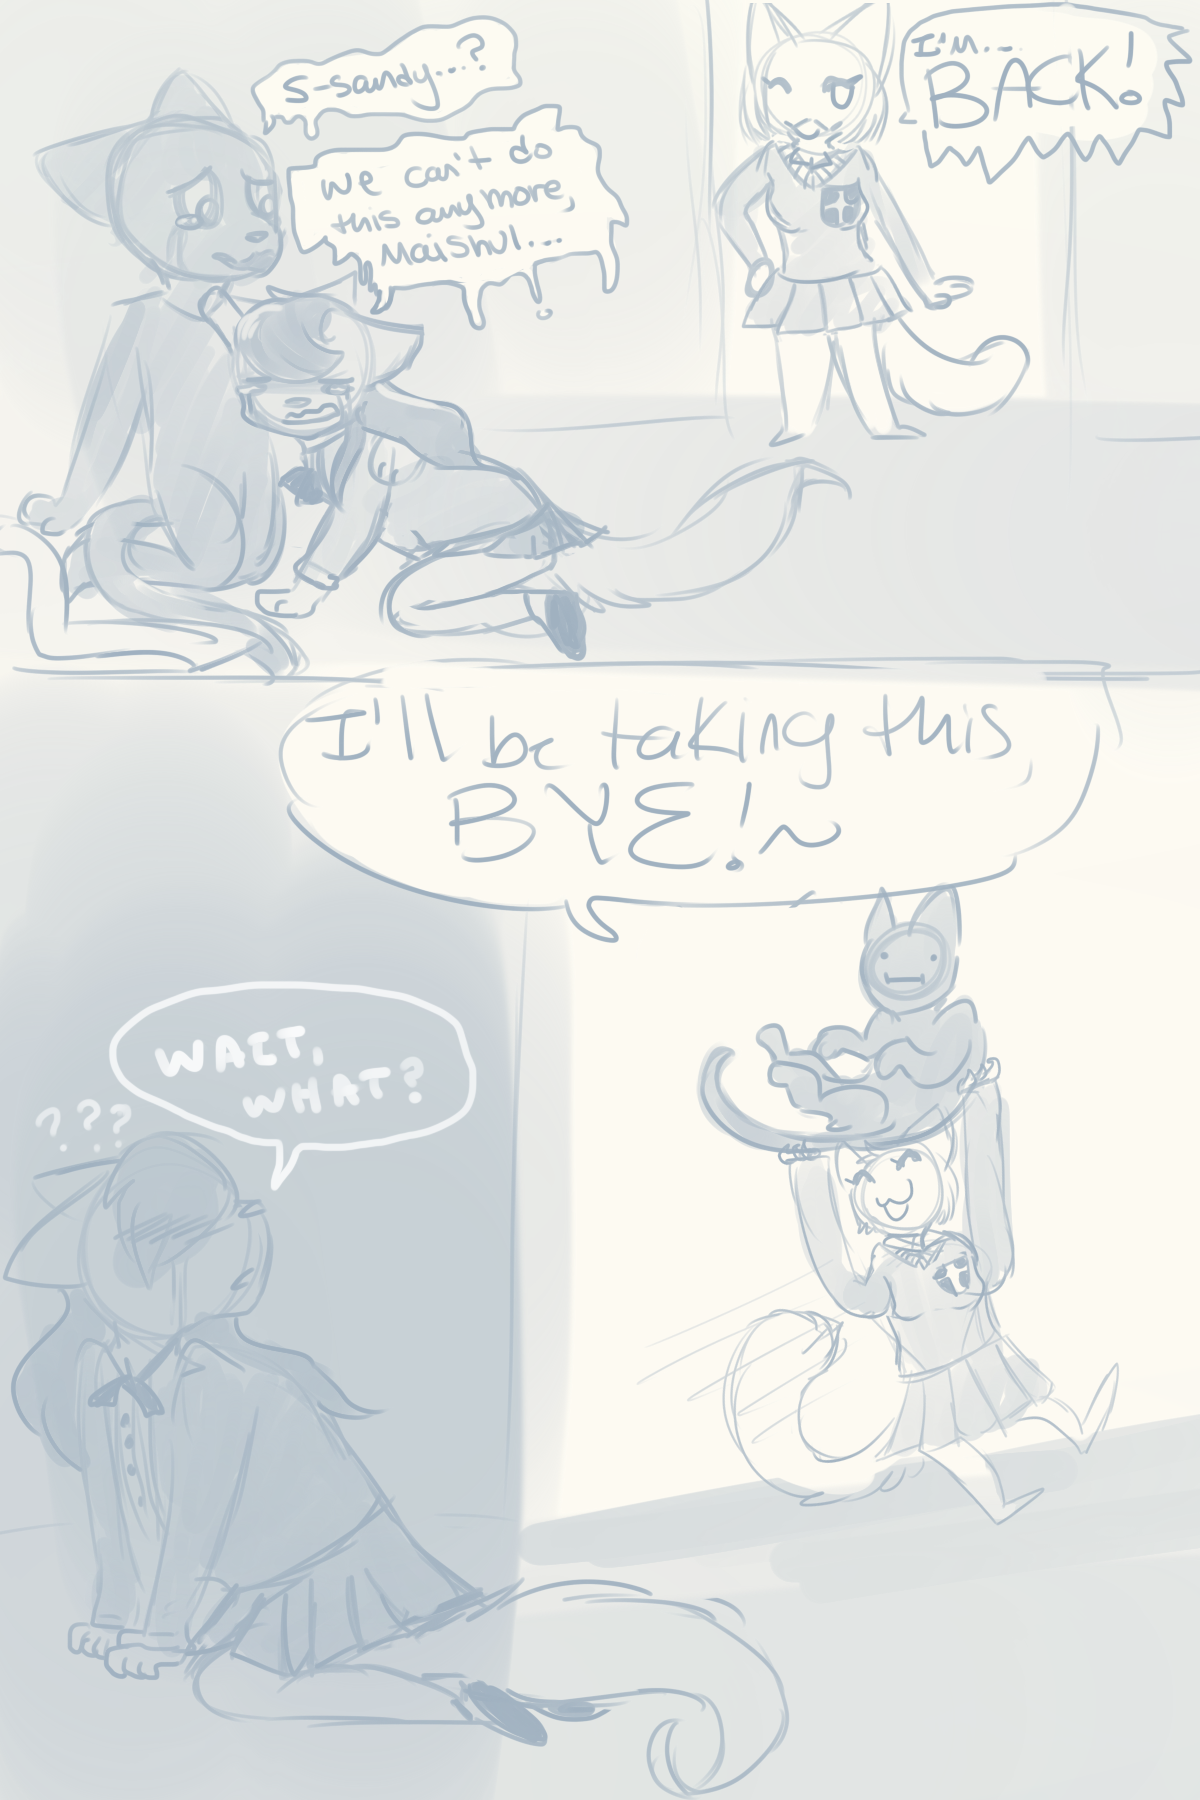 Candybooru image #11476, tagged with Lucy Mike MikexLucy Sandy Swiftily_(Artist) comic sketch